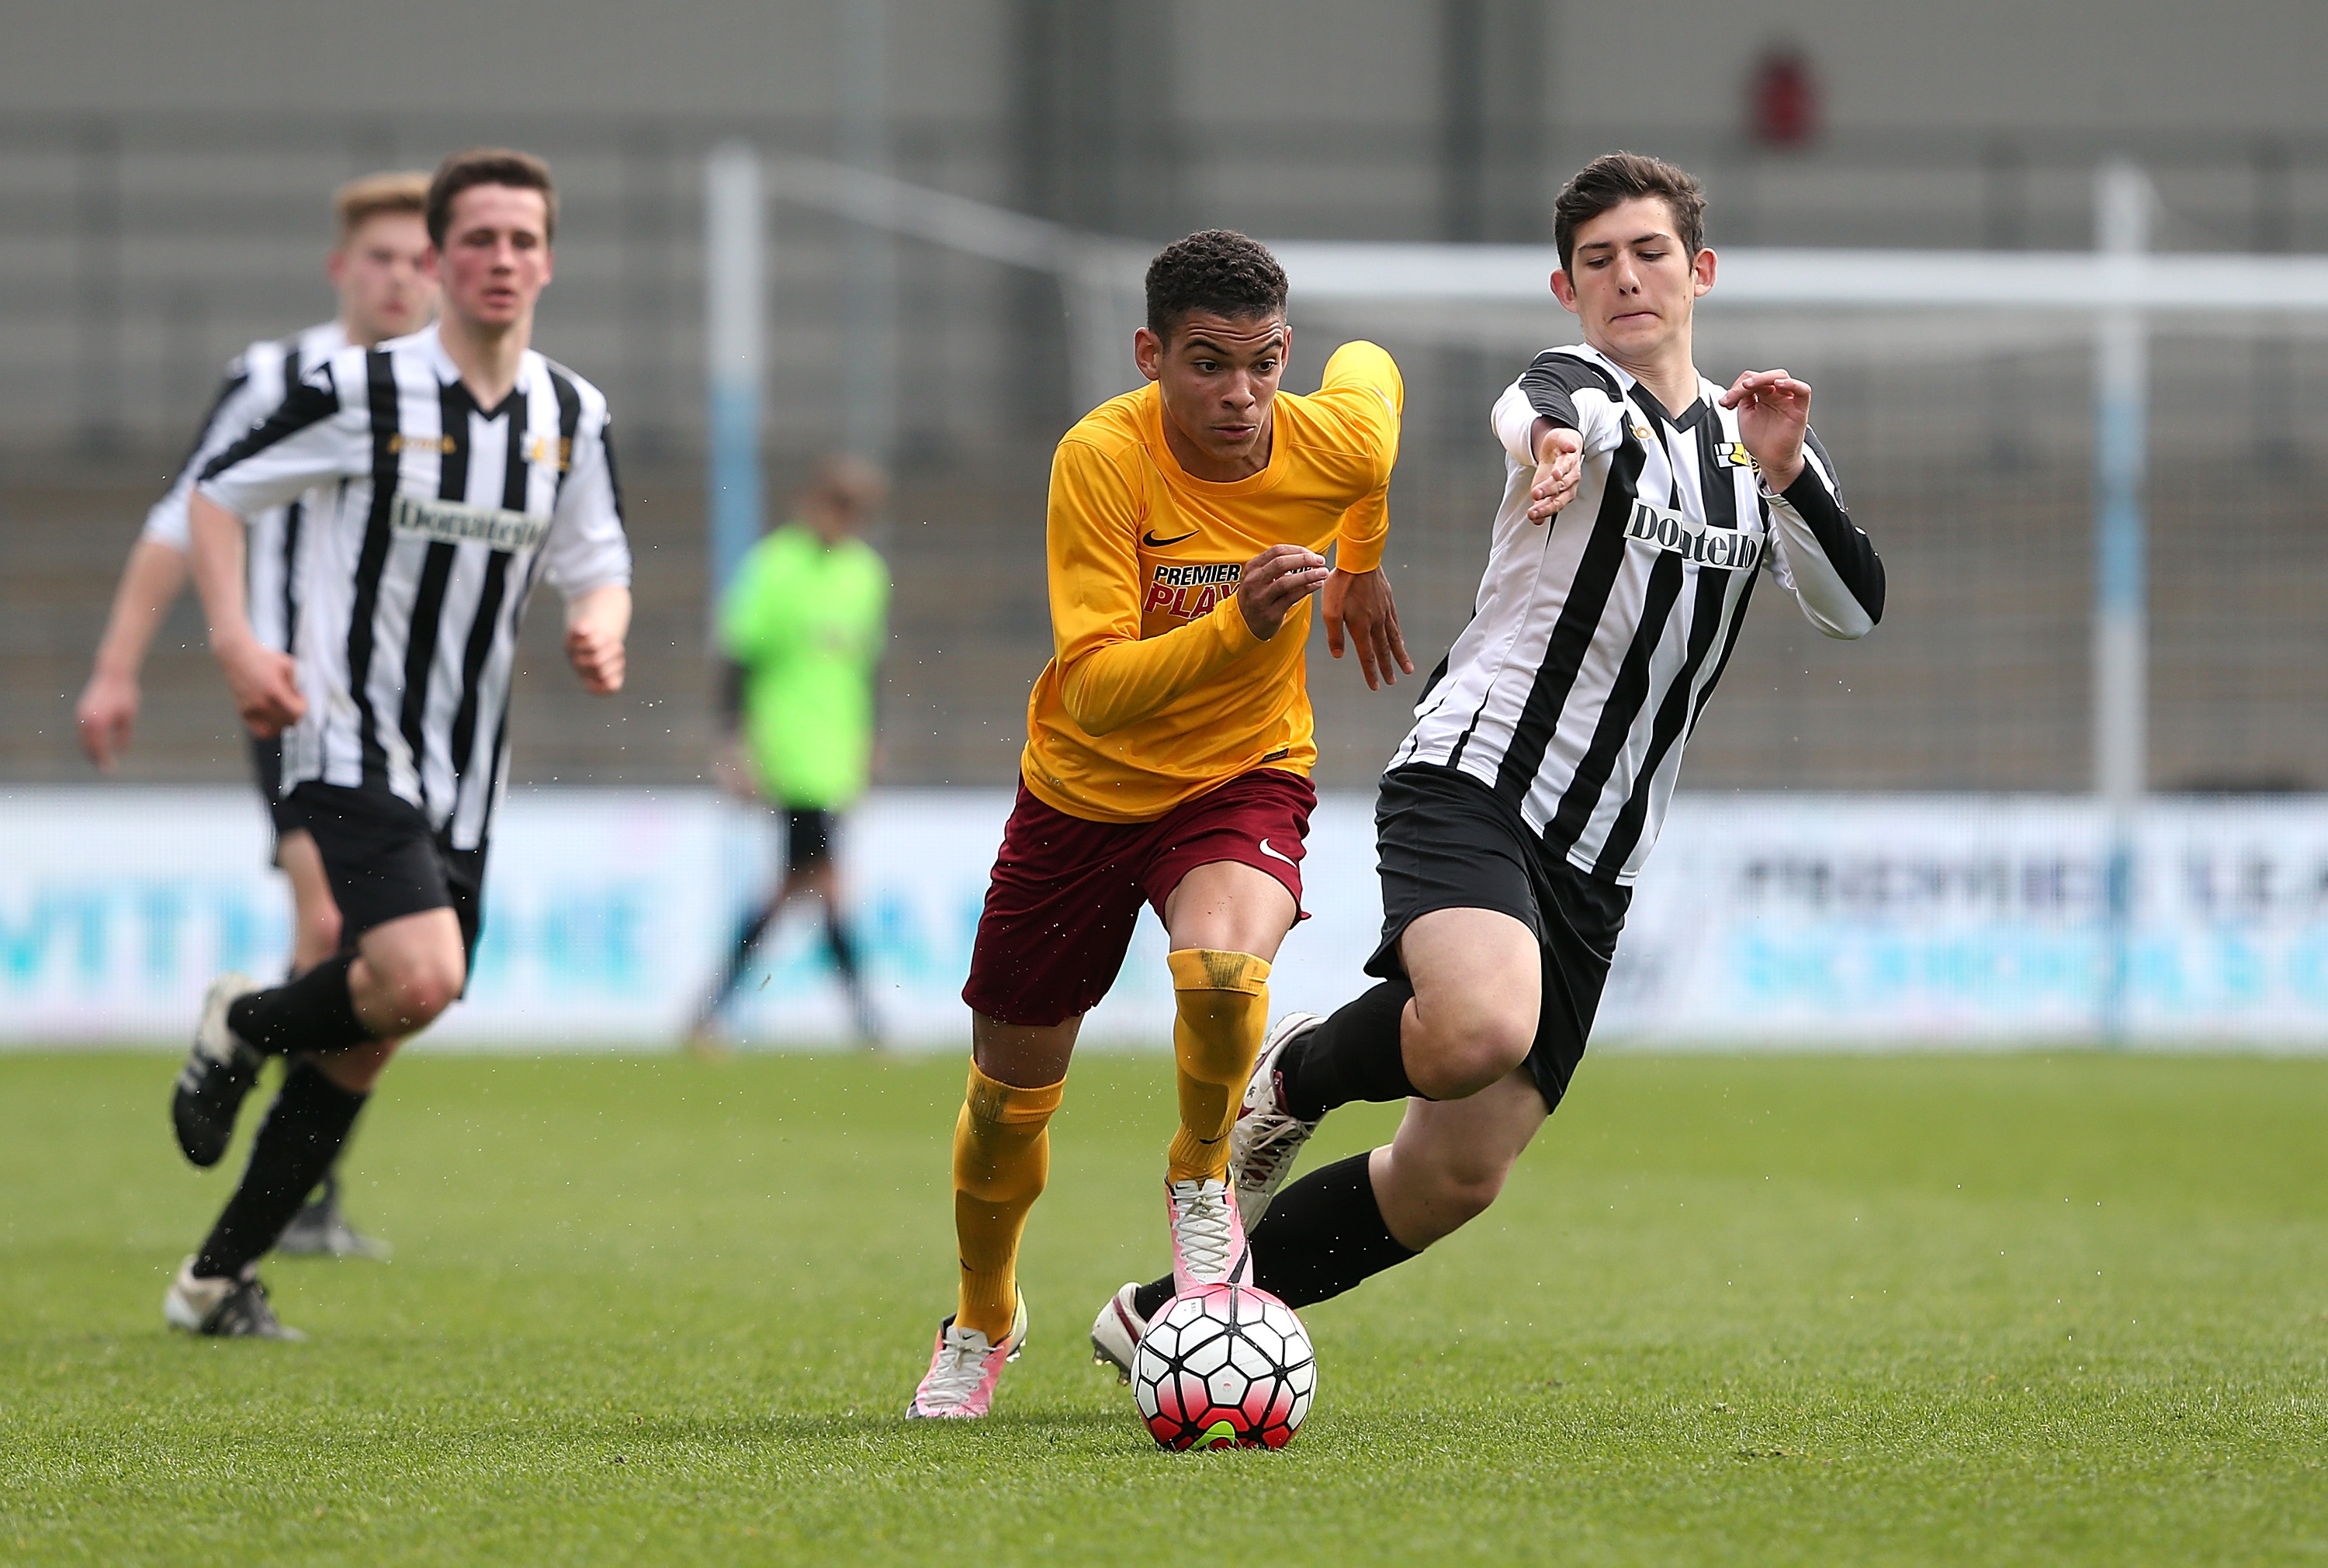 MANCHESTER, ENGLAND - MAY 06:  Morgan Gibbs-White of Thomas Telford School holds off Alfie Baeza-Collis of Dorothy Stringer School during the Premier League U16 Open Schools' final between Dorothy Stringer School and Thomas Telford School at the Etihad Campus on May 06, 2016 in Manchester, England.  (Photo by Jan Kruger/Getty Images)